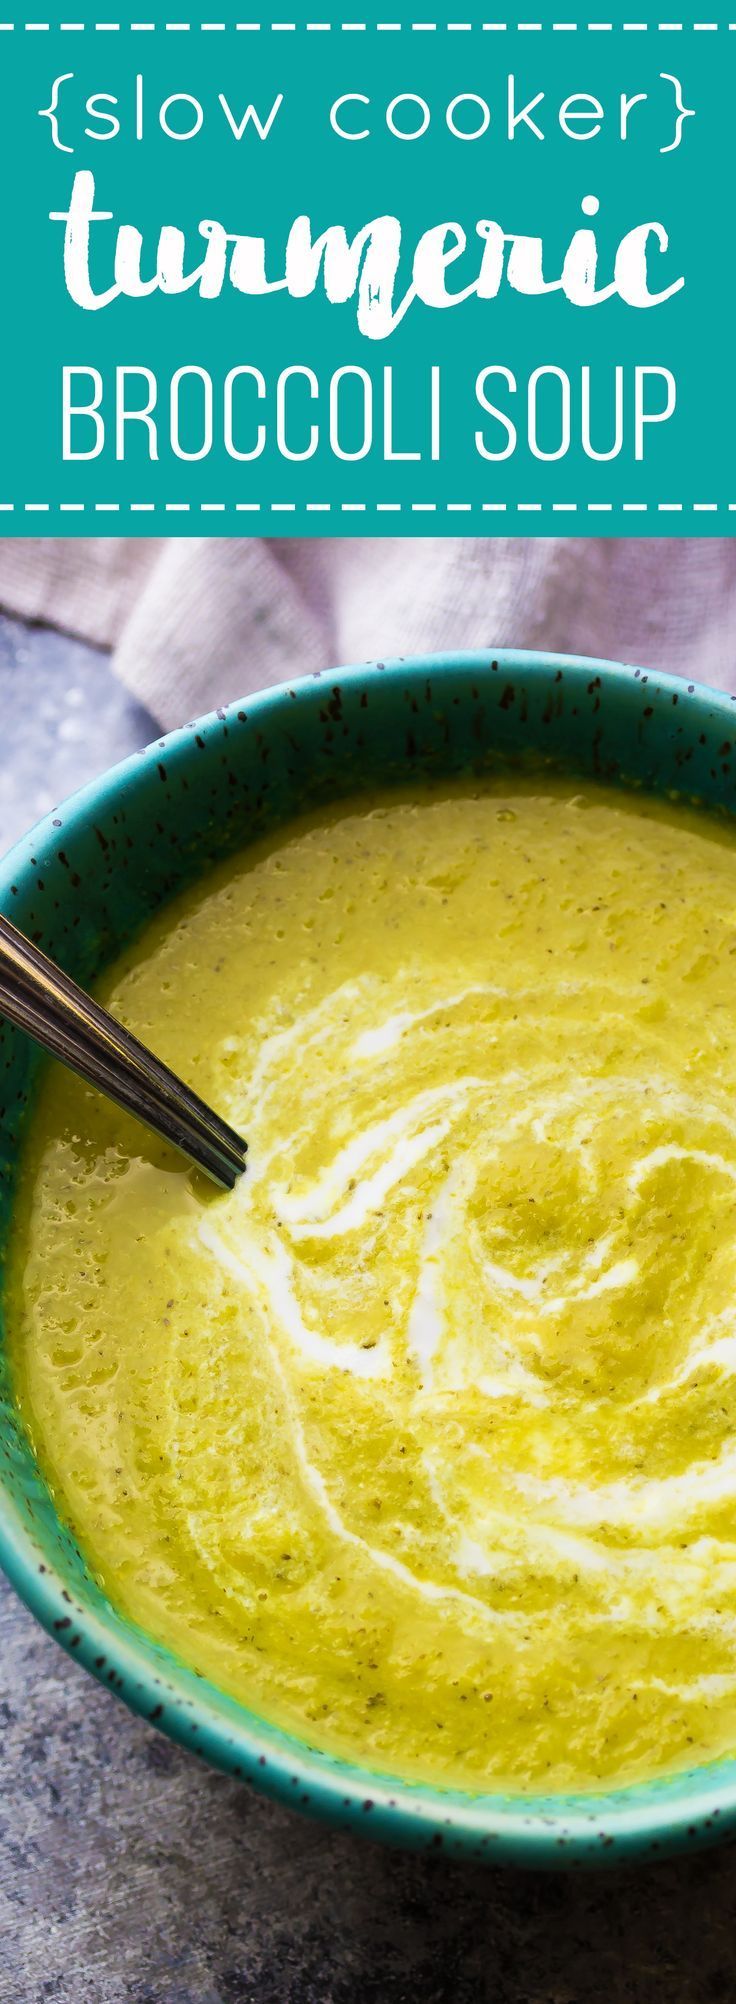 Anti-Inflammatory Broccoli, Ginger and Turmeric Soup (Slow Cooker) -   14 candida diet soup
 ideas